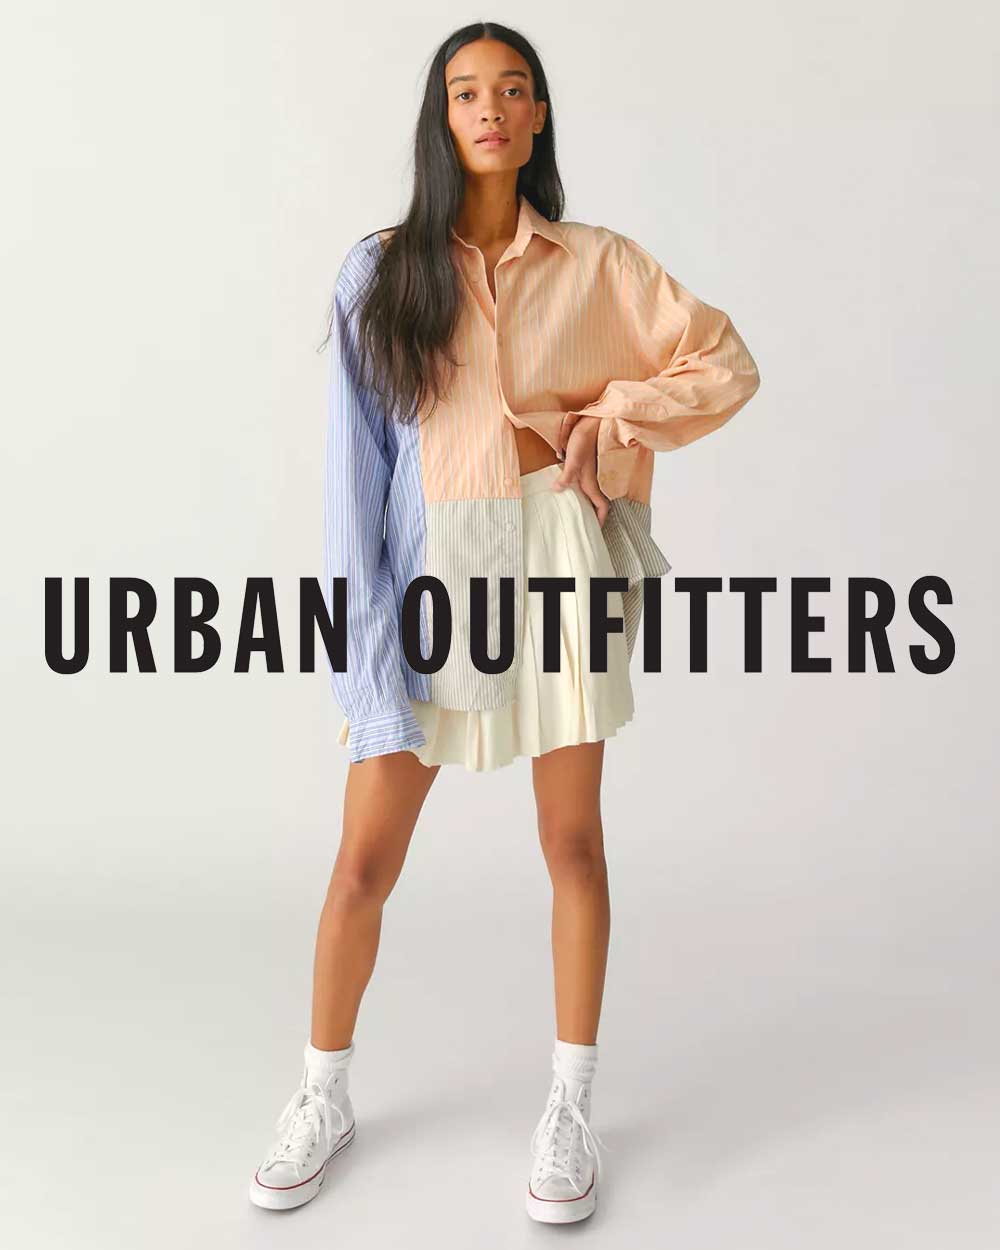 URBAN OUTFITTERS Upcycled Vintage clothing